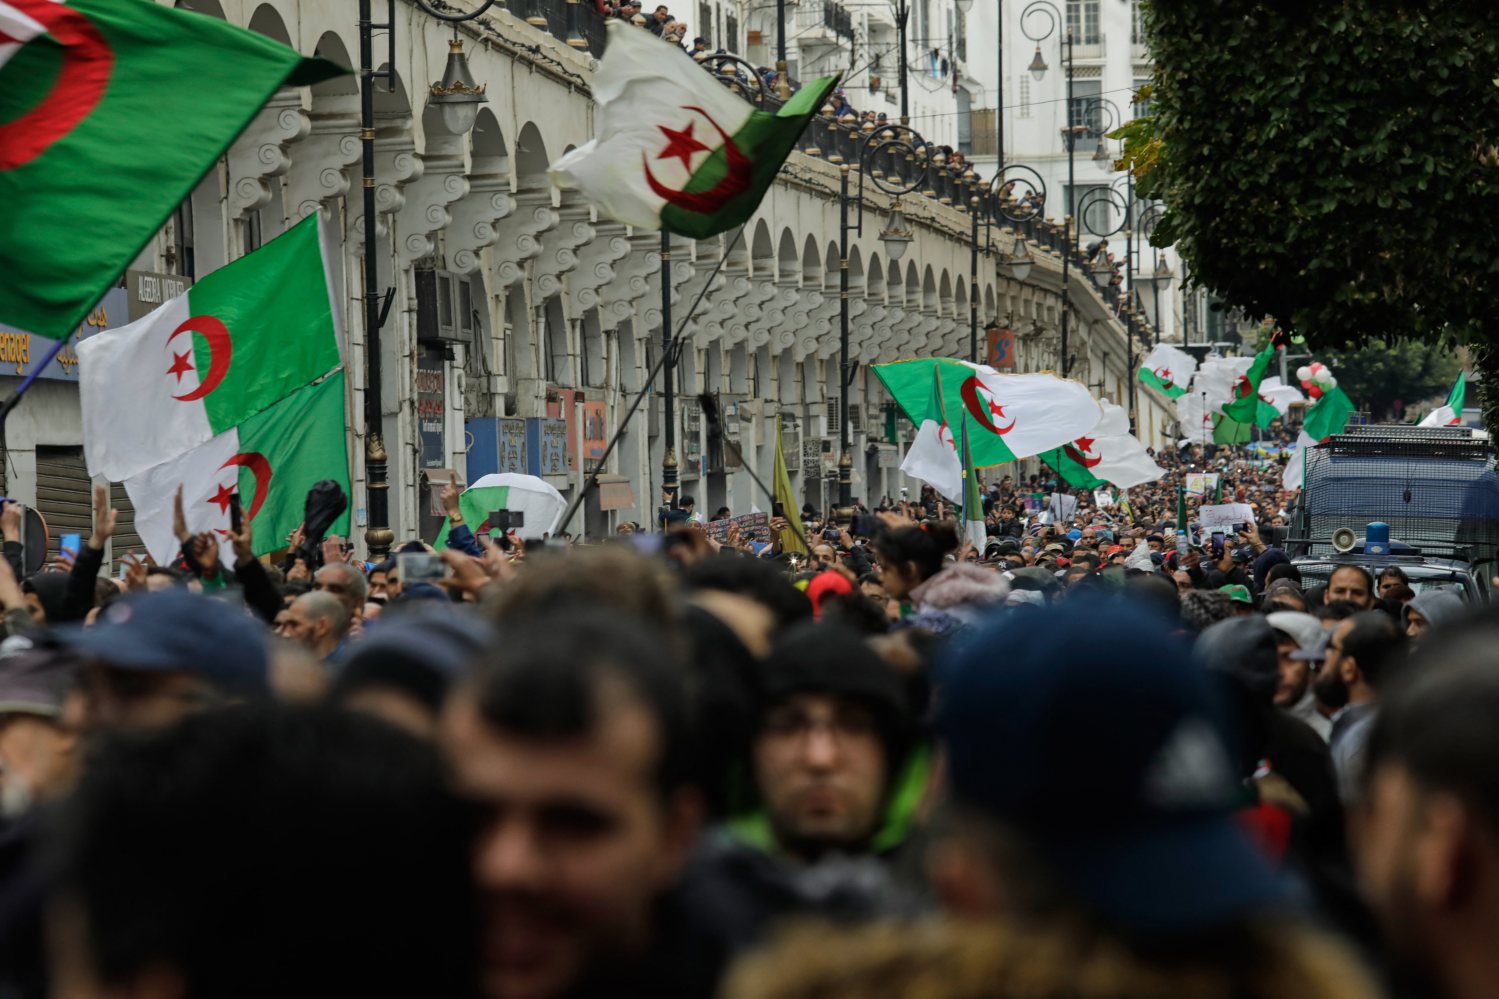 Anti-government demonstration in the center of the capital Algiers, Algeria on January 10, 2020. Photo by Louiza Ammi/ABACAPRESS.COM